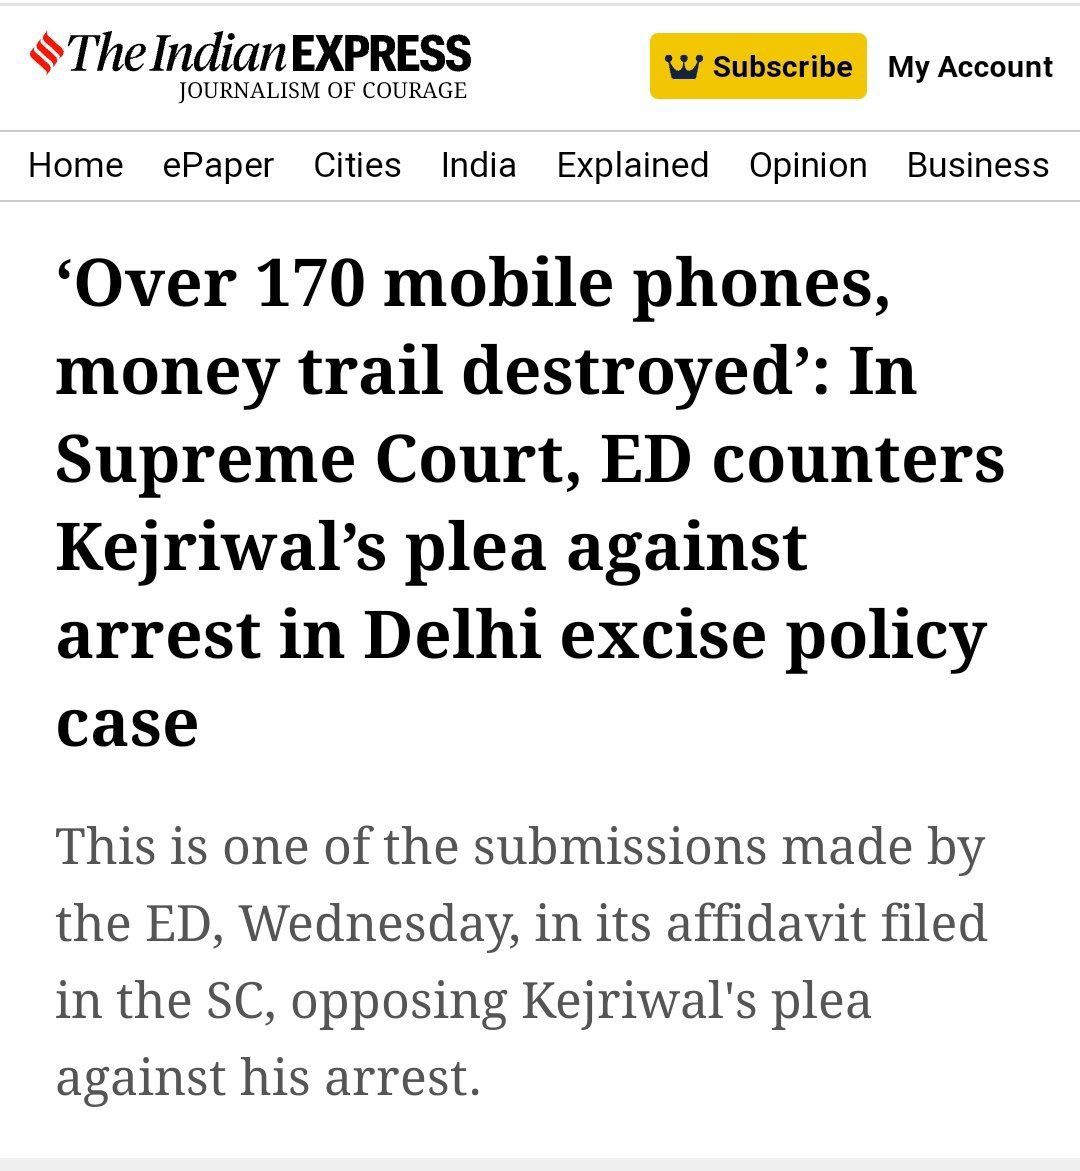 How can a आम आदमी afford to have 170 Cellphones? Strange. Isn't it? Anyways....he will have to give हिसाब of all his deeds in front of #SupremeCourt on Monday.